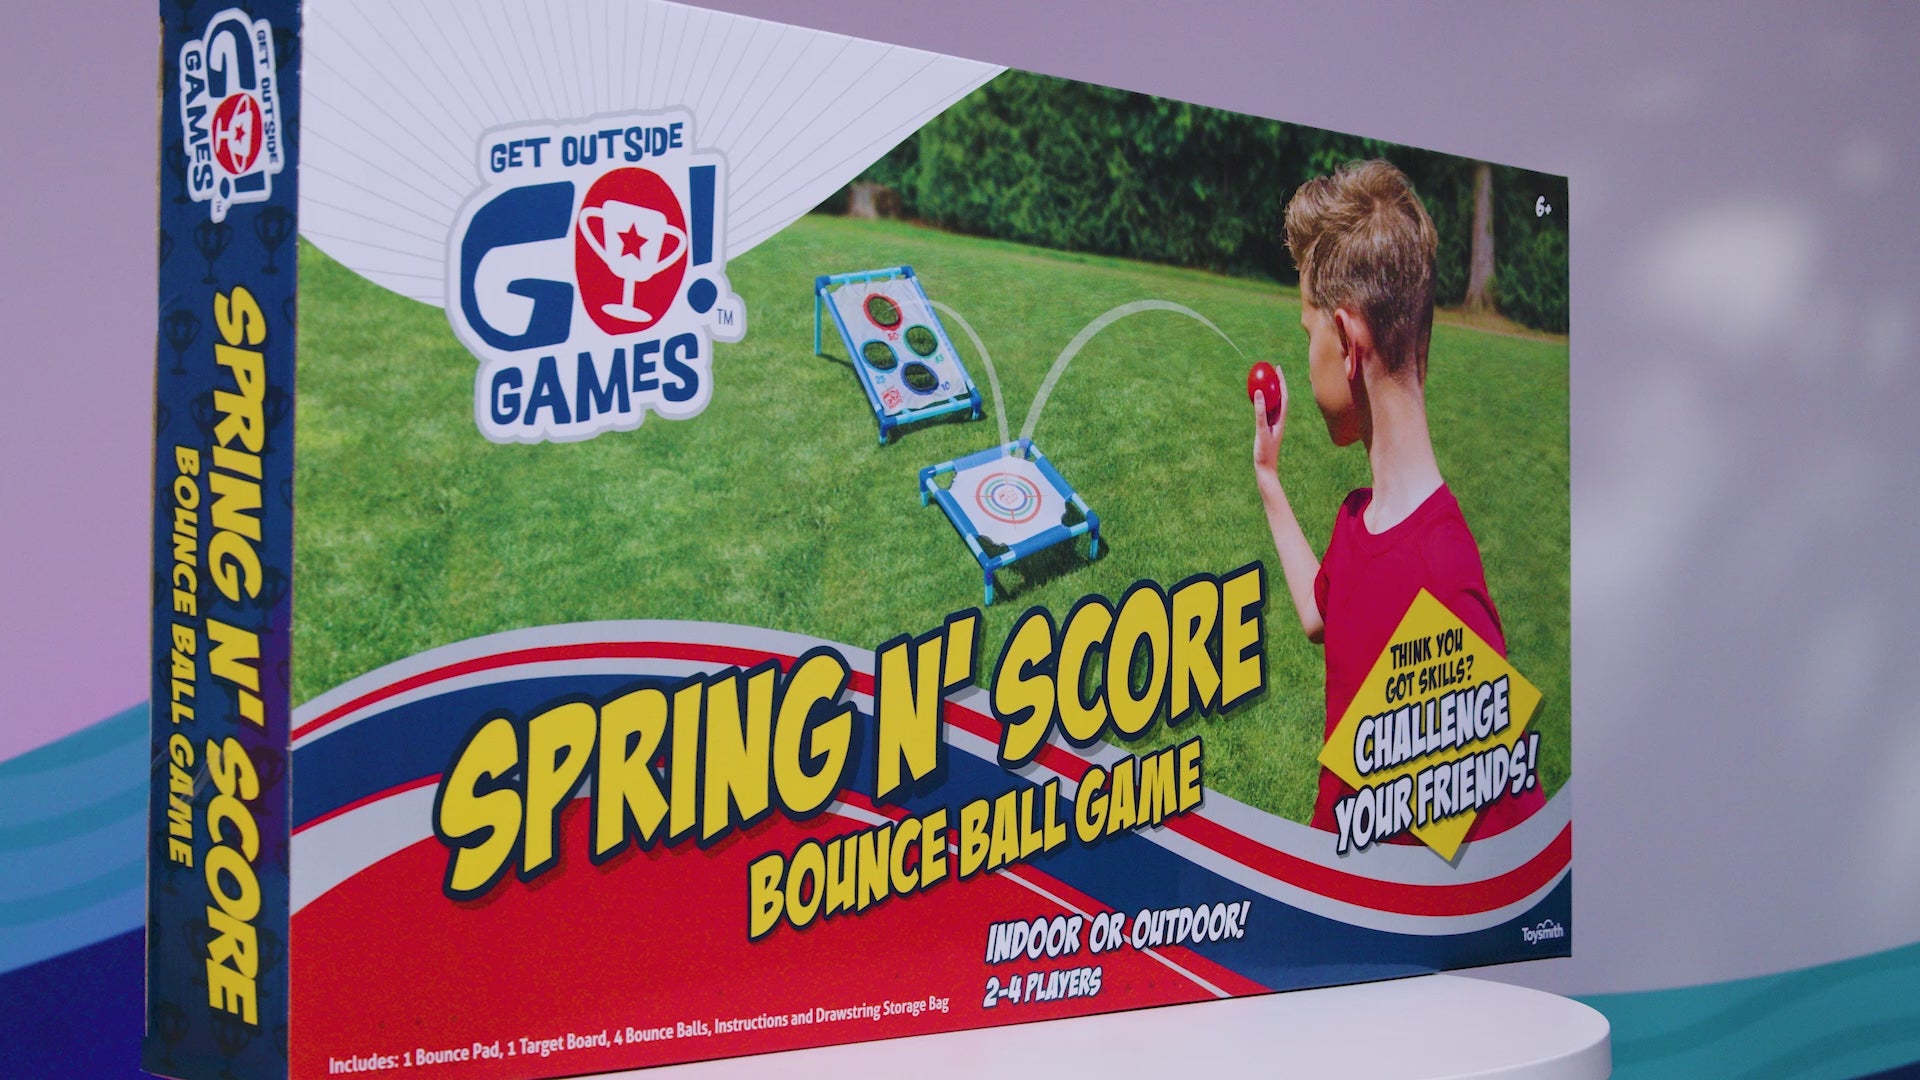 Video showing the Spring N' Score Bounce Ball Game in use